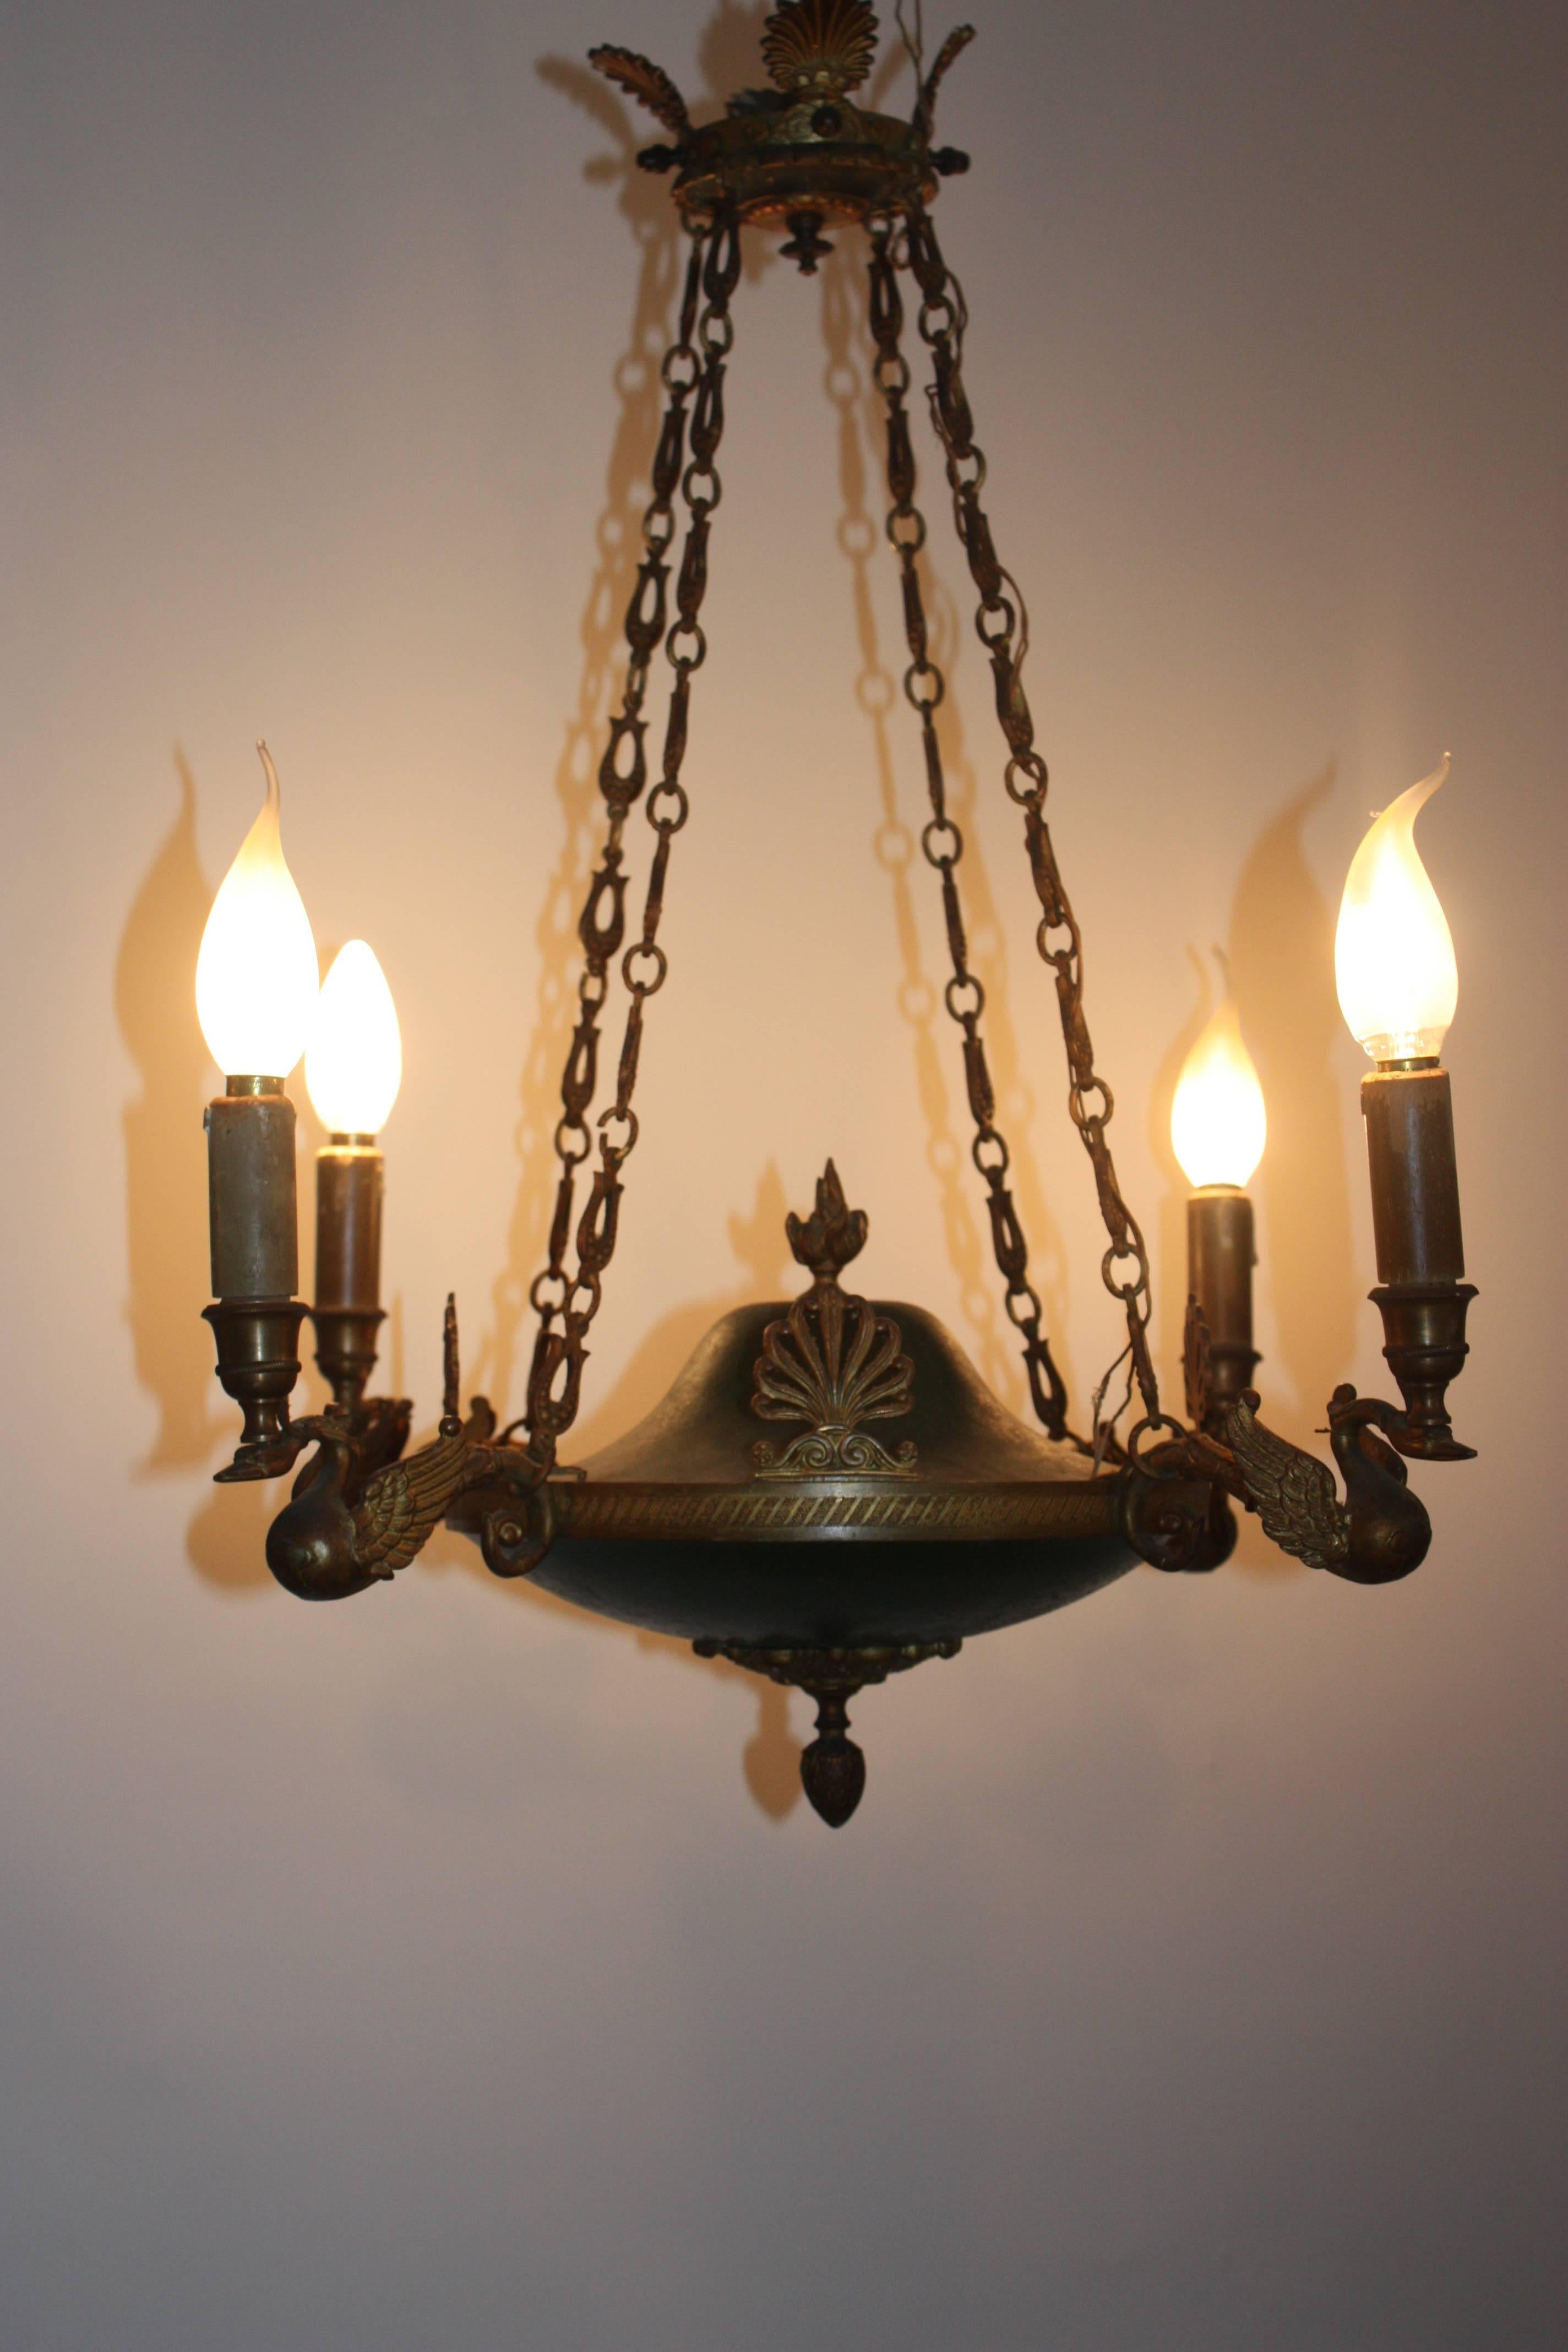 Patinated 19th Century Empire Style Four-Light Chandelier, France, circa 1870s